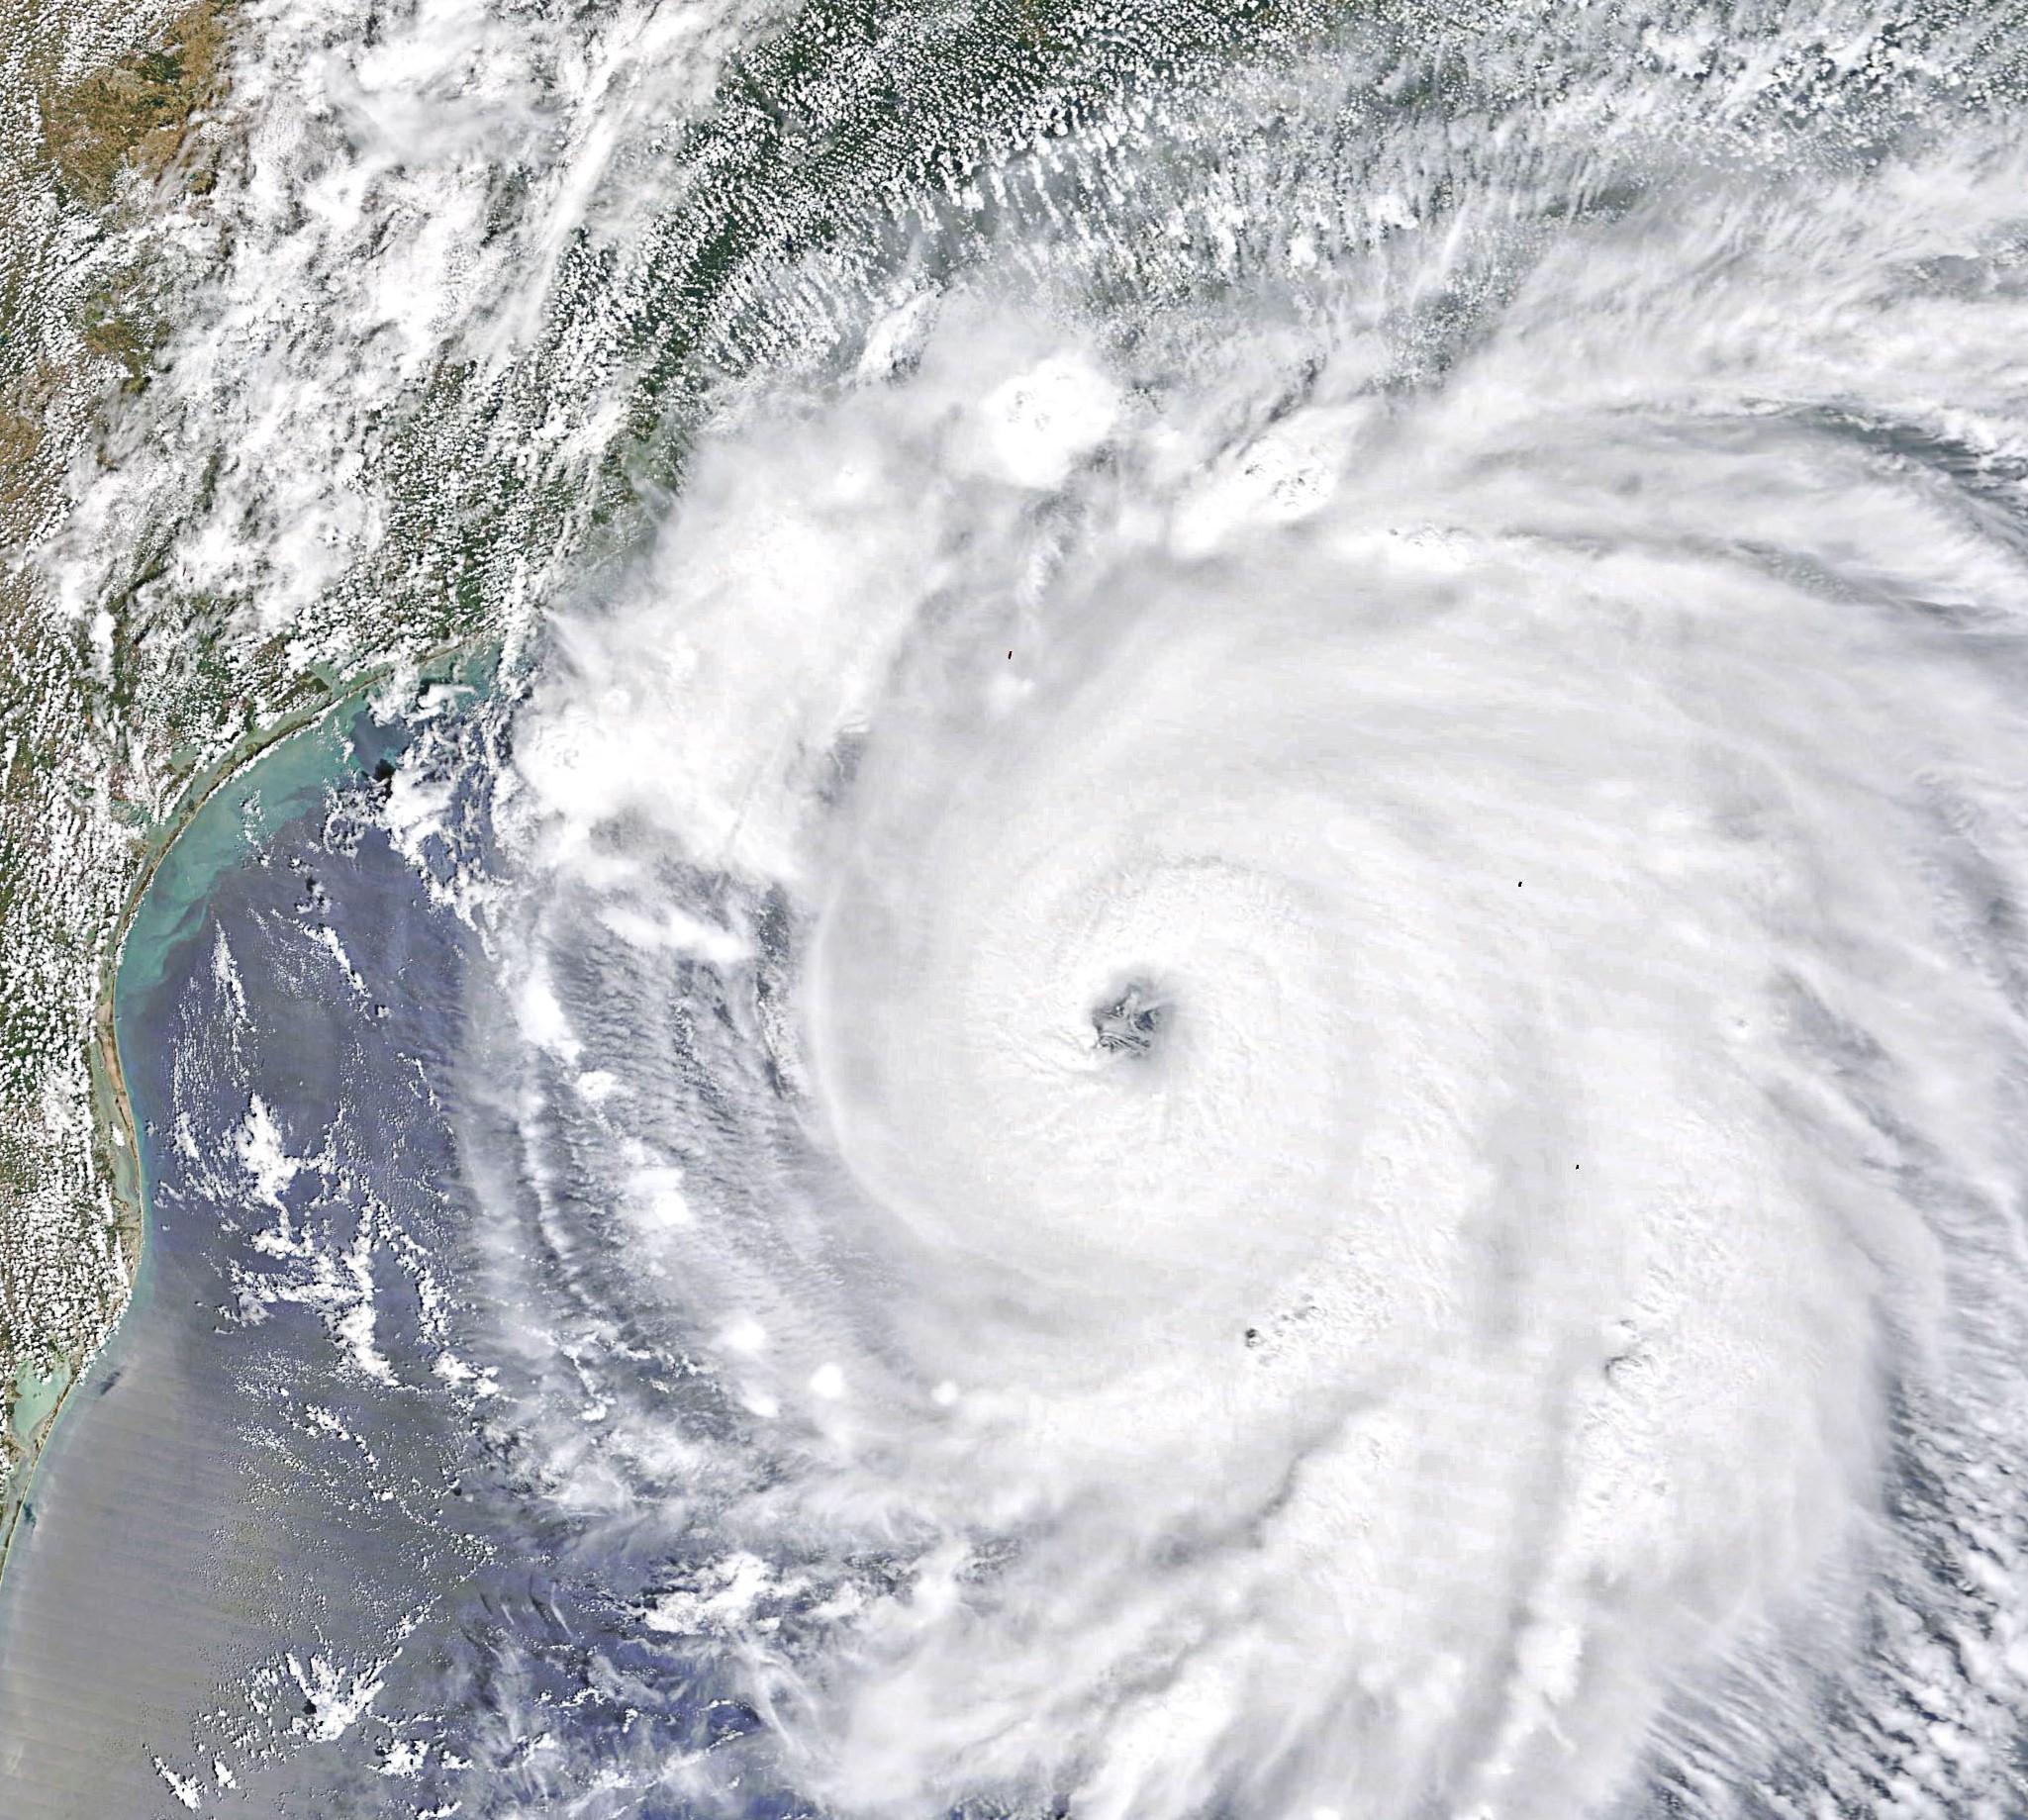  Satellite imagery of a hurricane (white, counterclockwise swirl of clouds in the center of the image) over blue-green water. It is close to land, with patches of green and brown visible beneath the white clouds.